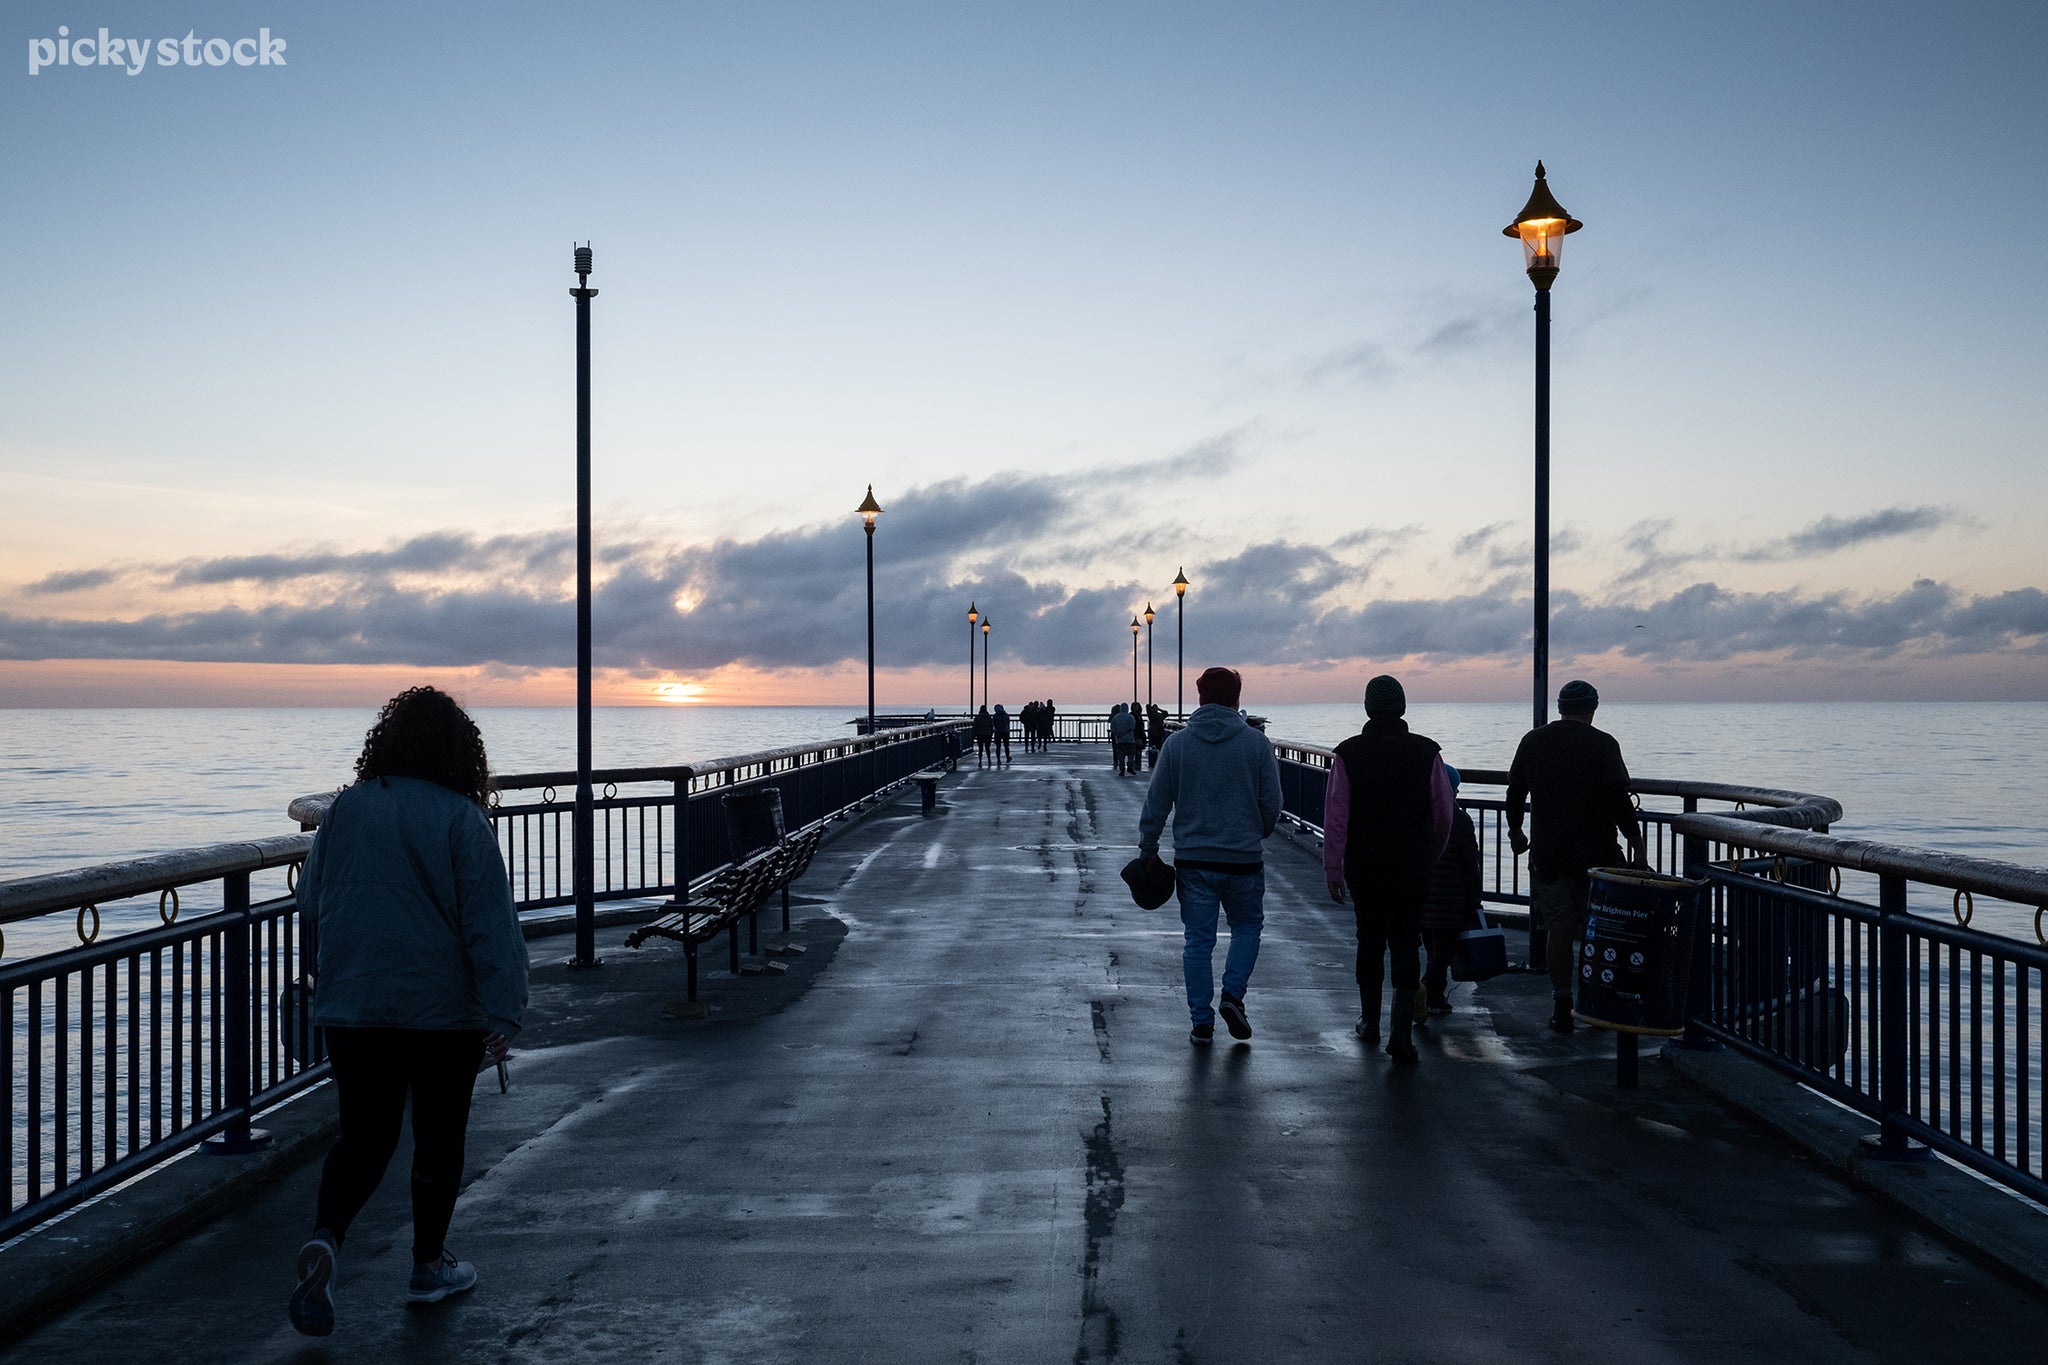 Landscape of a wet concrete pier in the afternoon, tall lanterns cast a soft orange glow on the people below. The sun sets in the distance as many sightseers amble towards the end to watch its final descent.